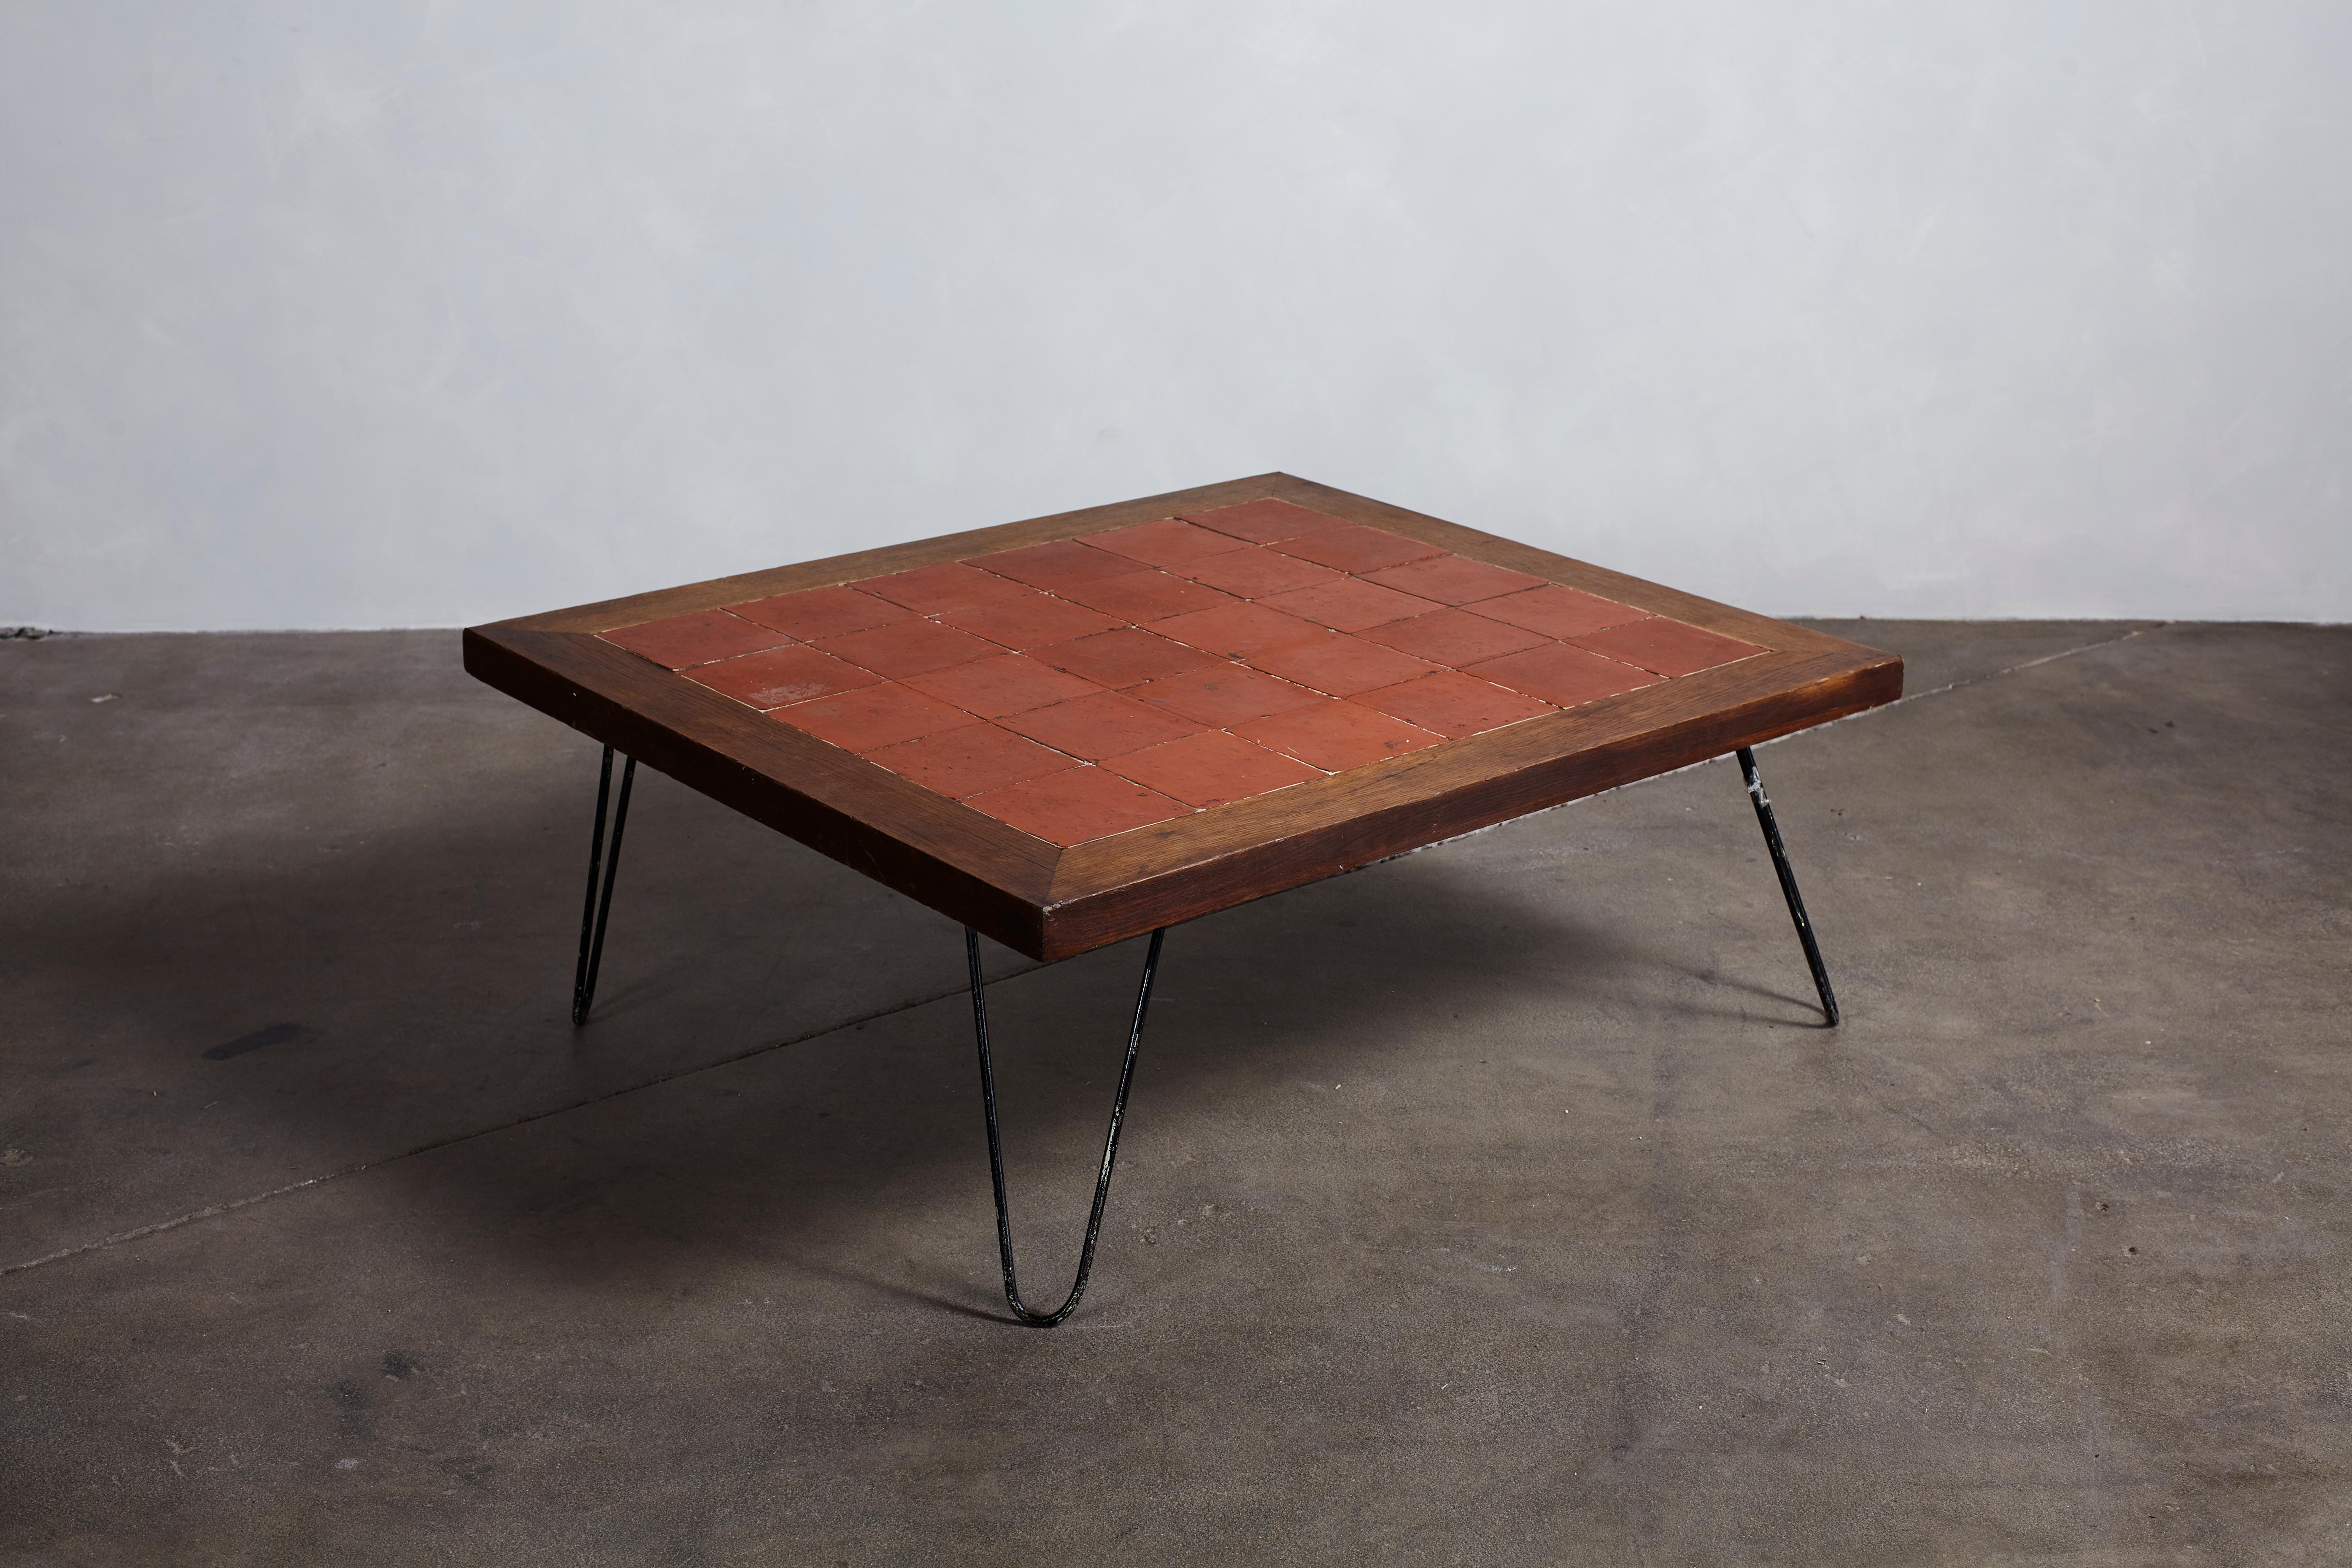 French rustic square terra cotta tile table with wood frame on hairpin legs.